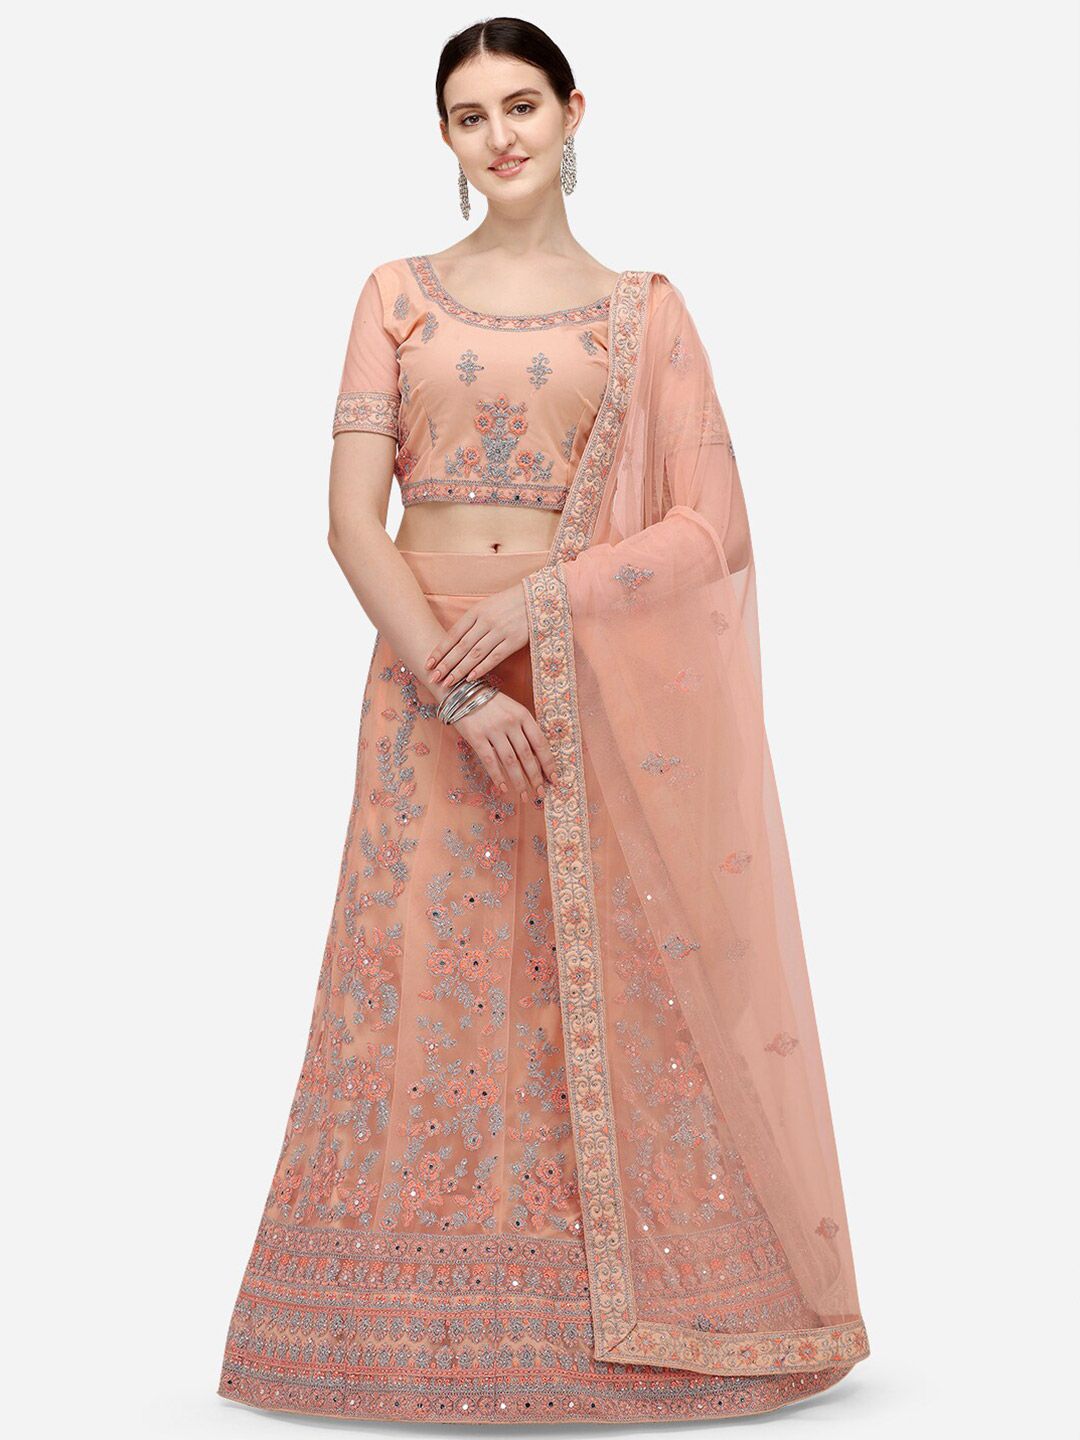 Netram Peach-Coloured & Silver-Toned Embroidered Mirror Work Semi-Stitched Lehenga & Unstitched Blouse With Price in India